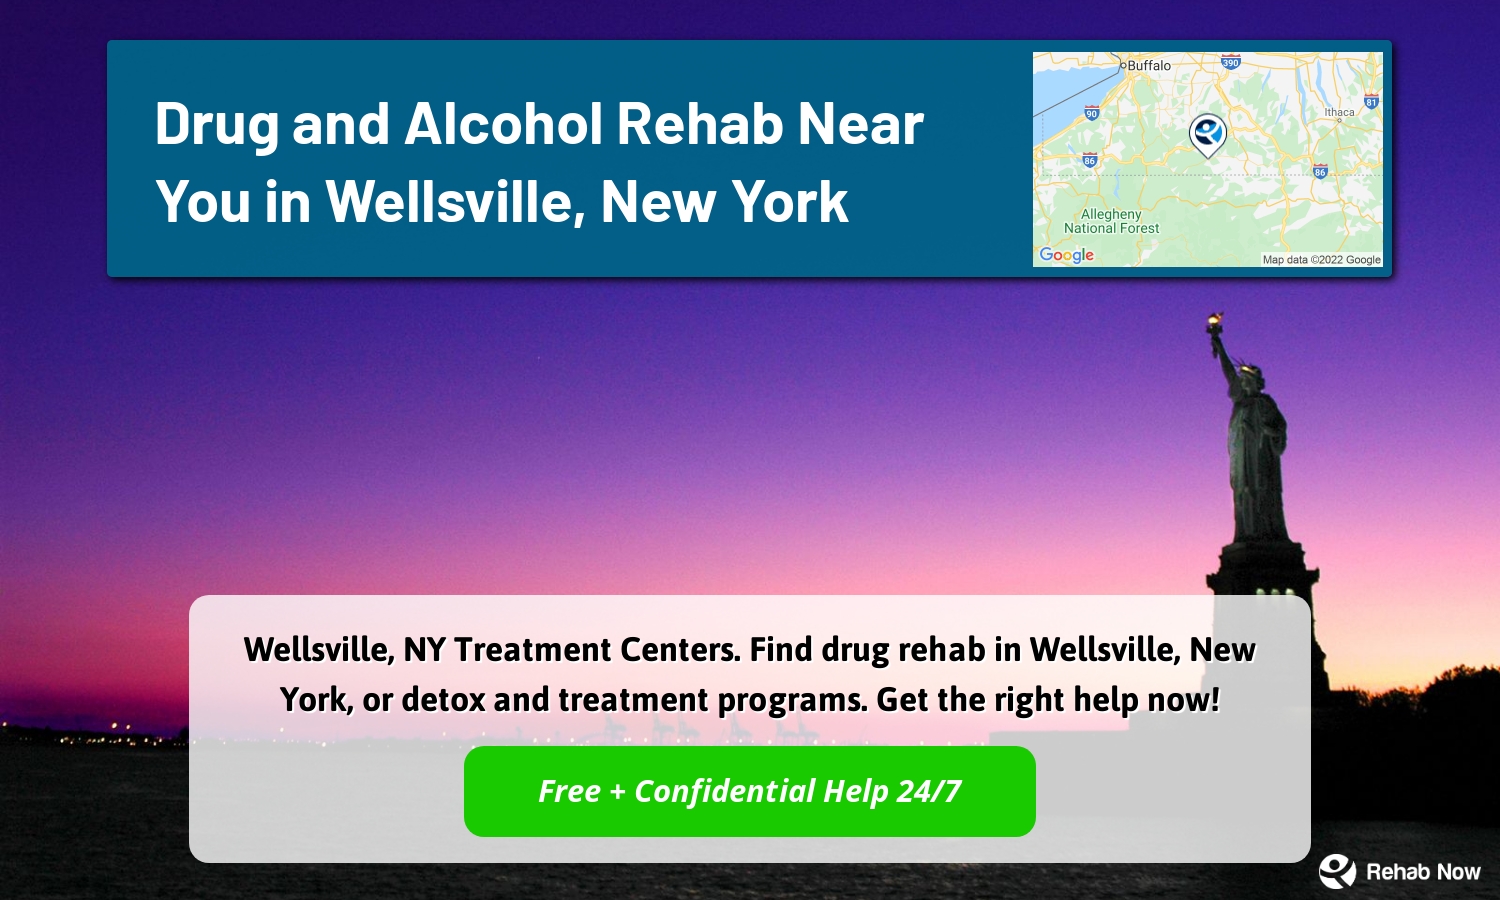 Wellsville, NY Treatment Centers. Find drug rehab in Wellsville, New York, or detox and treatment programs. Get the right help now!